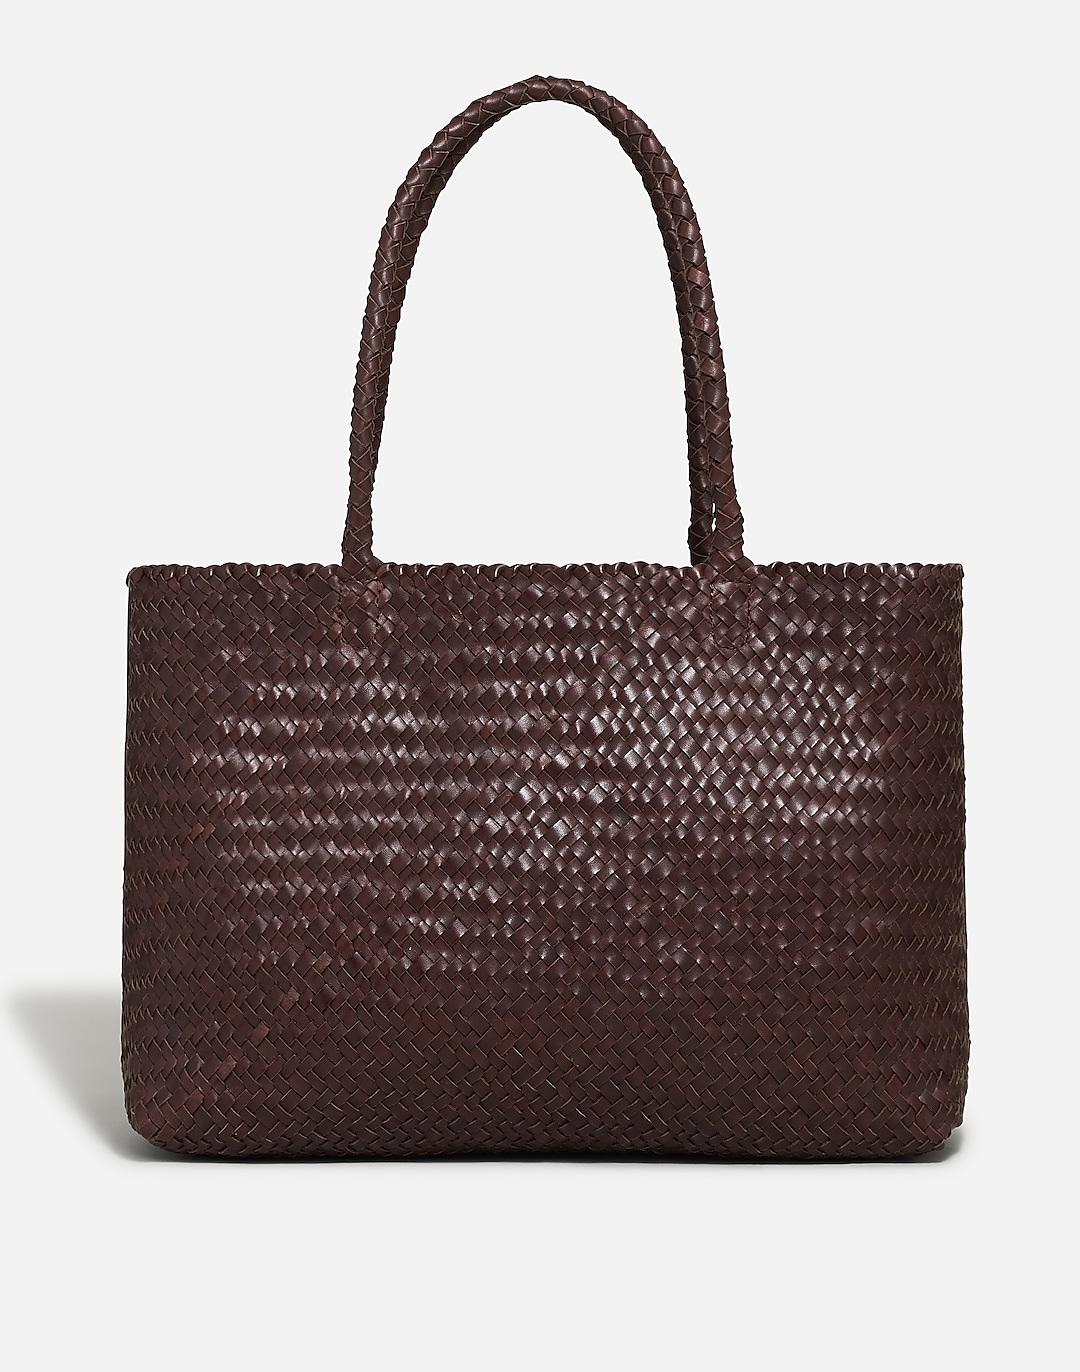 Handwoven Leather Tote | Madewell